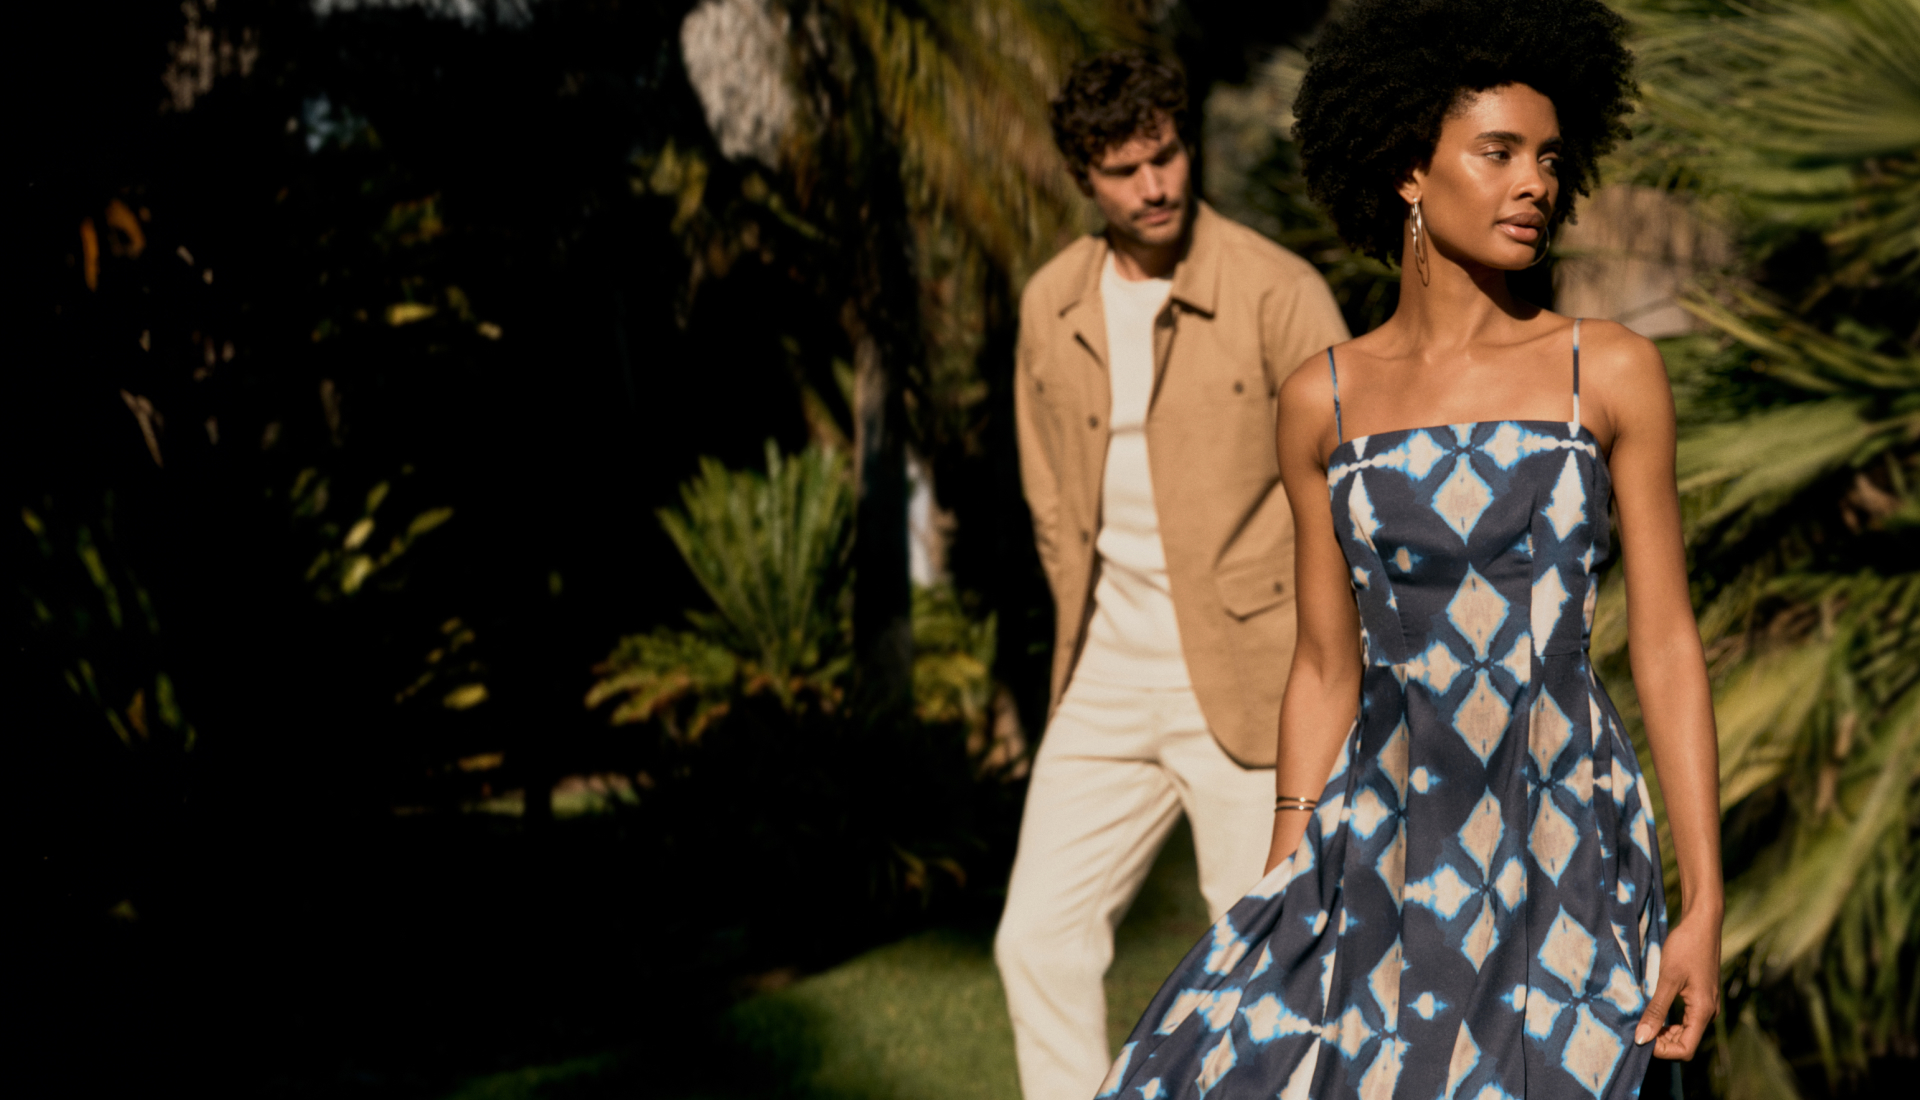 New Arrivals from $25. Our latest versatile styles were made to do it all, going from weekend getaways to summer weddings with ease. Shop Now.